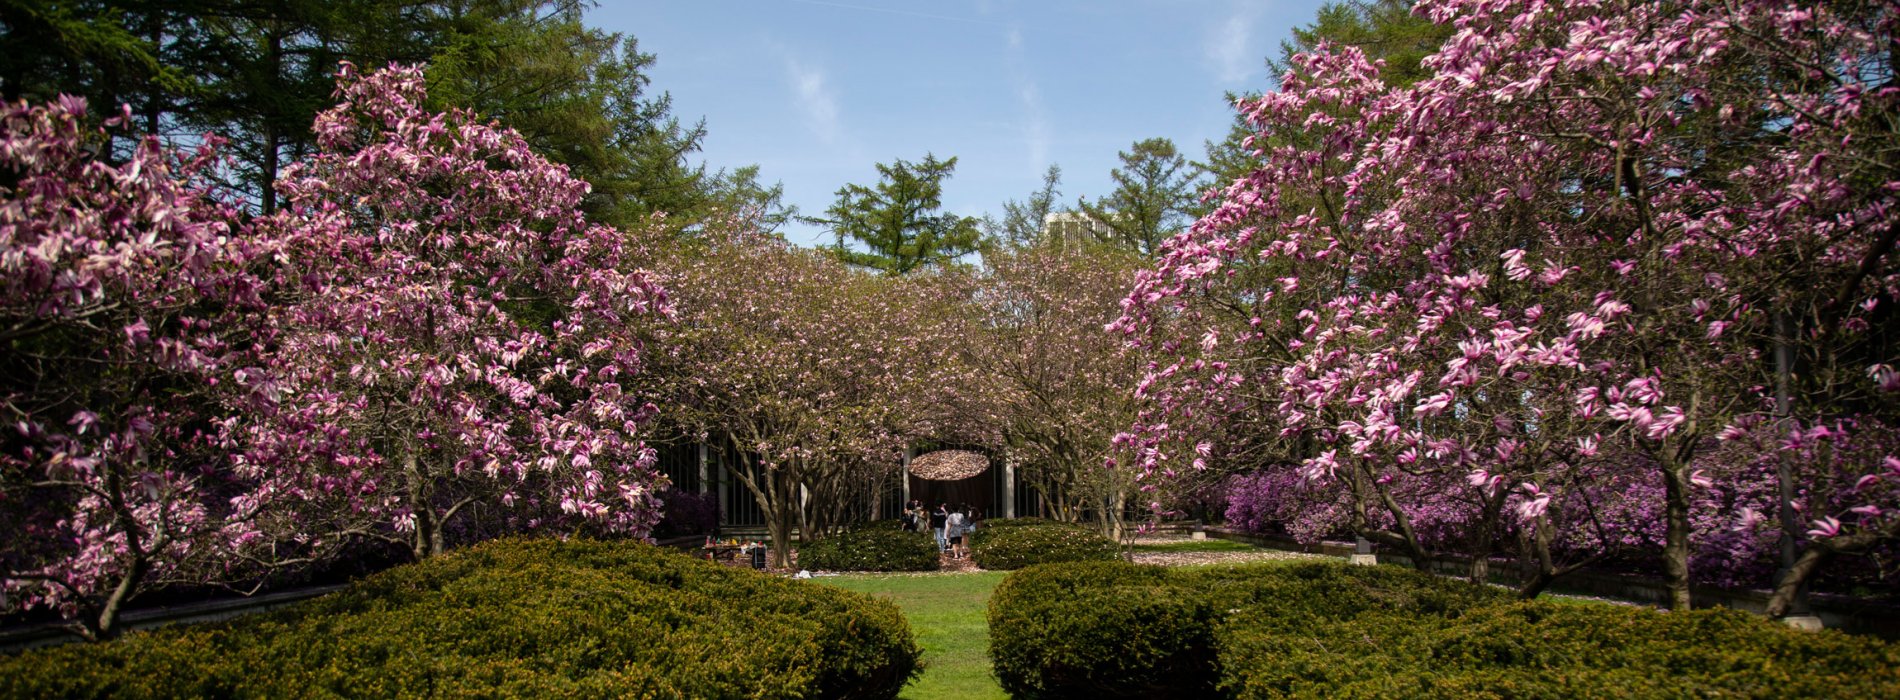 A garden on the Uptown Campus with pink flowers, green grass and bushes surrounded a bronze abstract sculpture.